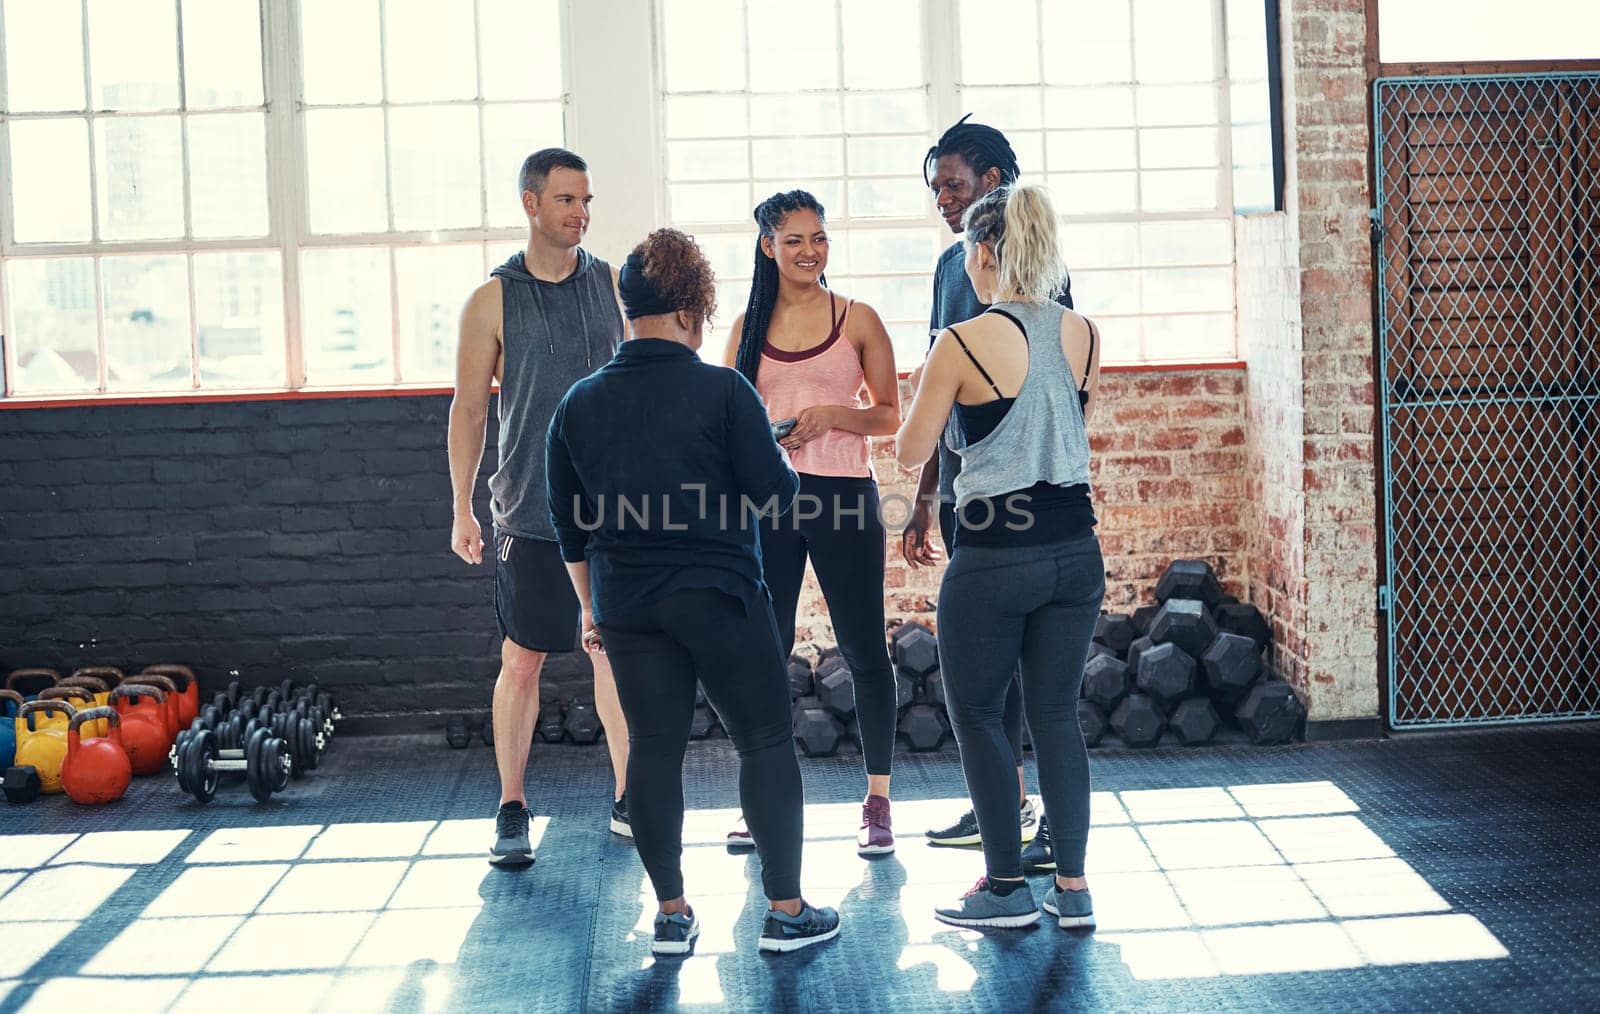 Everyone form a circle. a cheerful young group of people standing in a circle and having a conversation before a workout in a gym